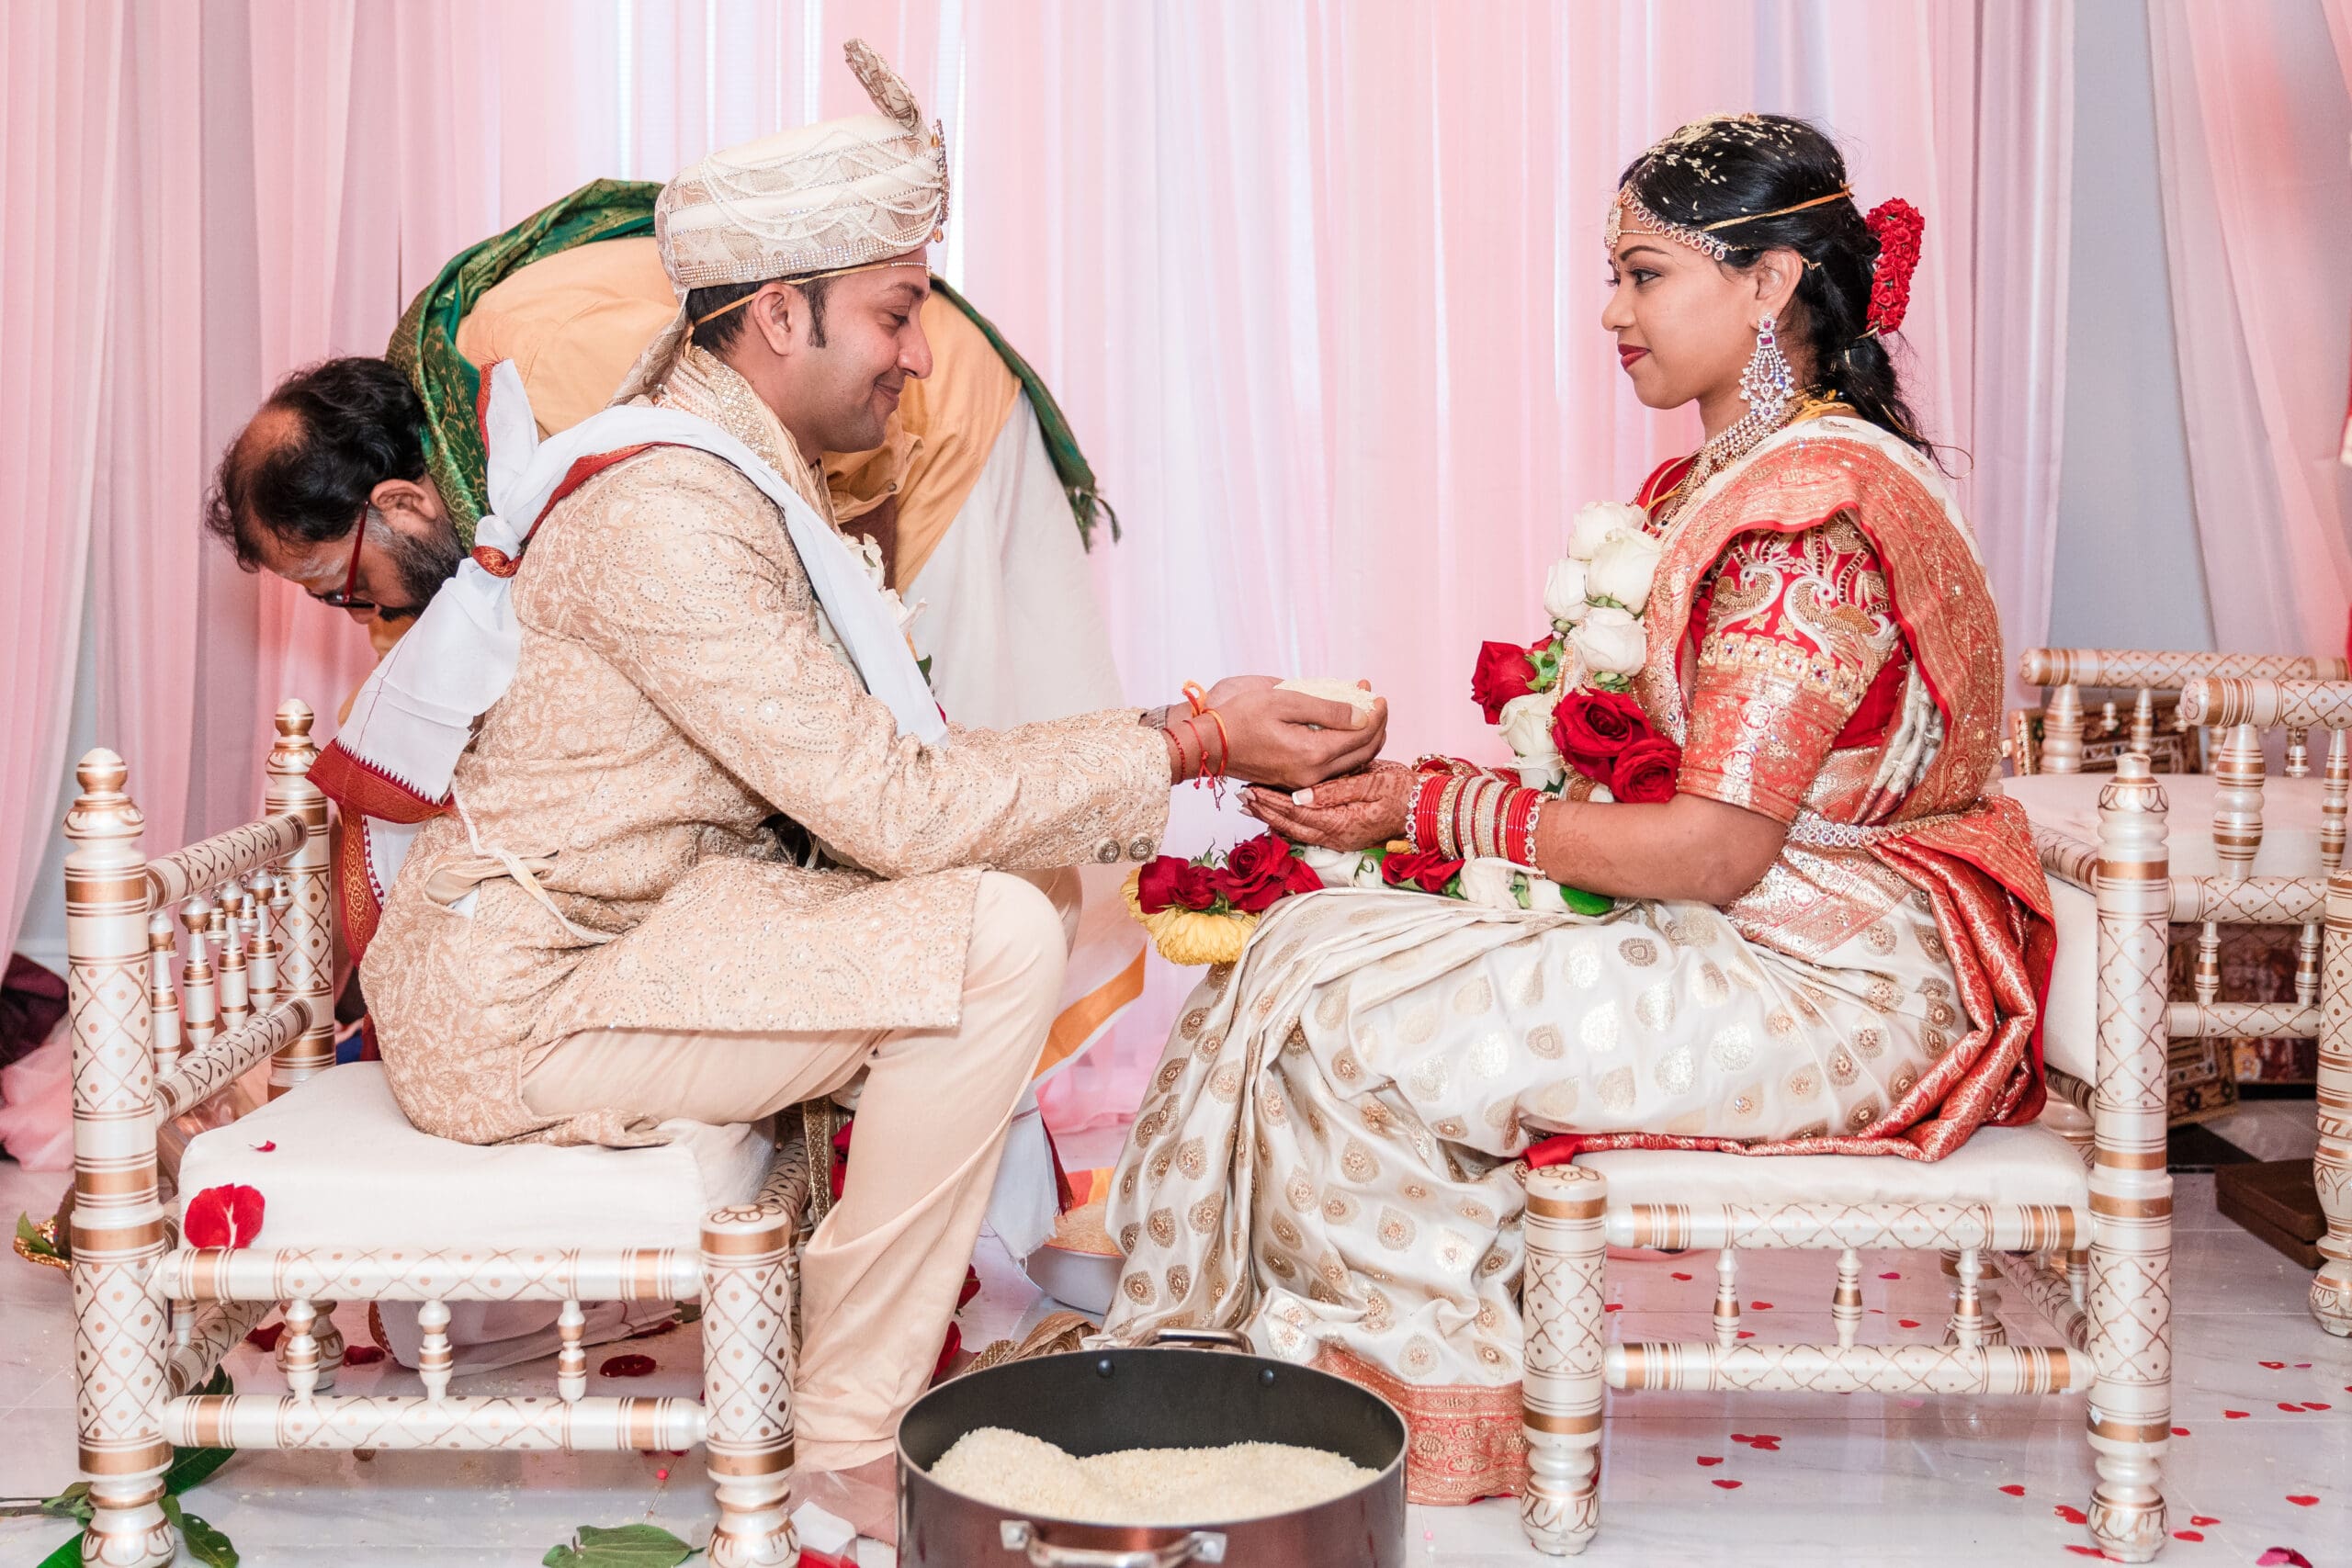 Smiling couple engaging in a cherished cultural ritual at their wedding celebration.